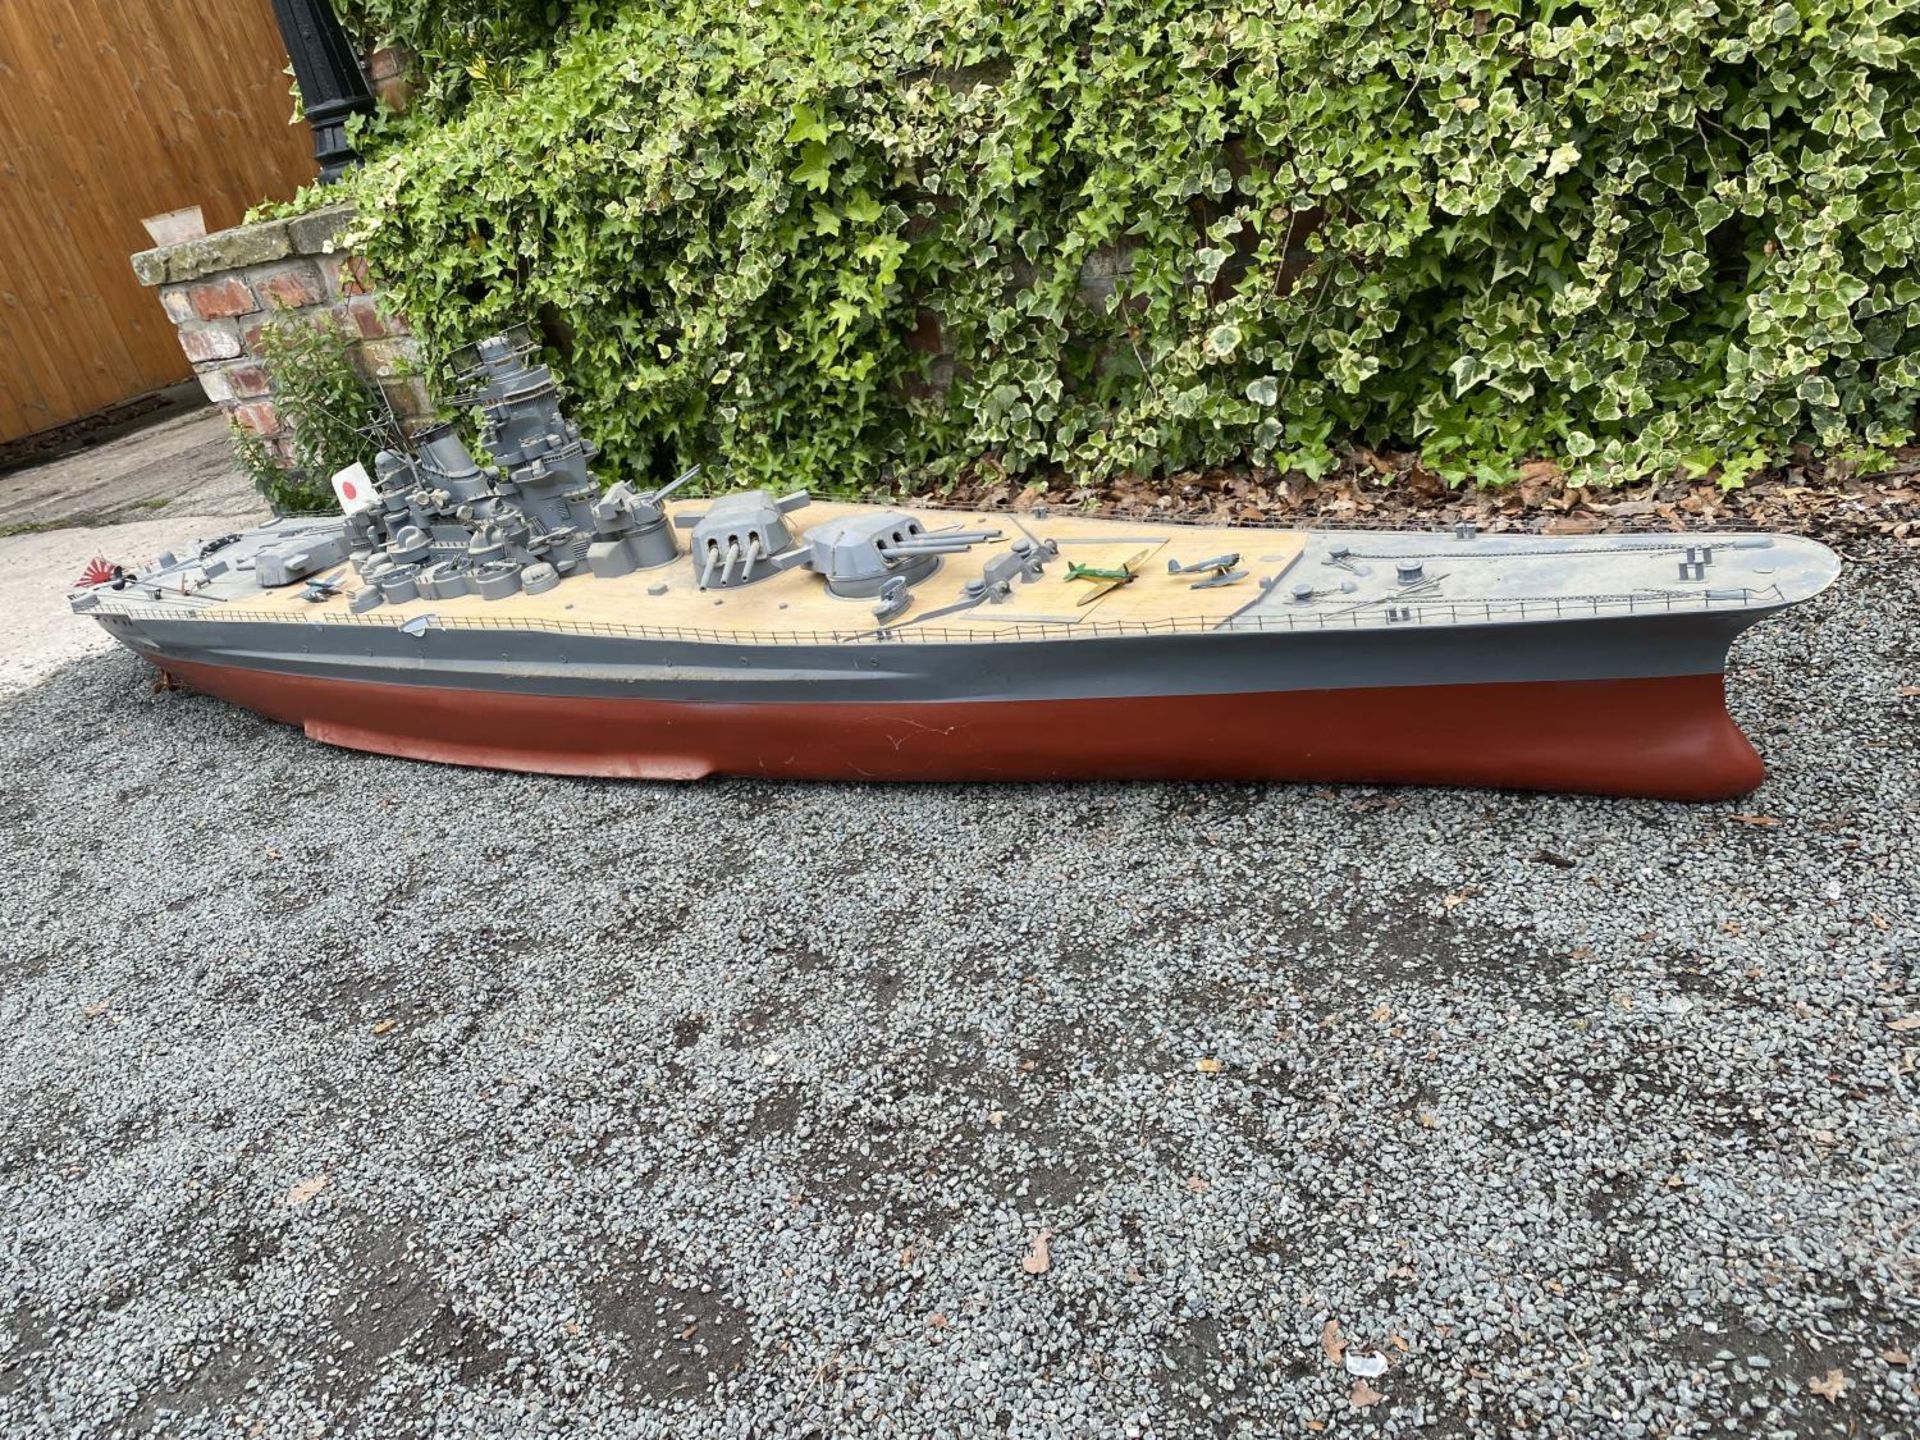 A VERY LARGE MOTORISED REMOTE CONTROLLED MODEL OF WWII JAPANESE MUSASHI / YAMATO WAR SHIP WITH